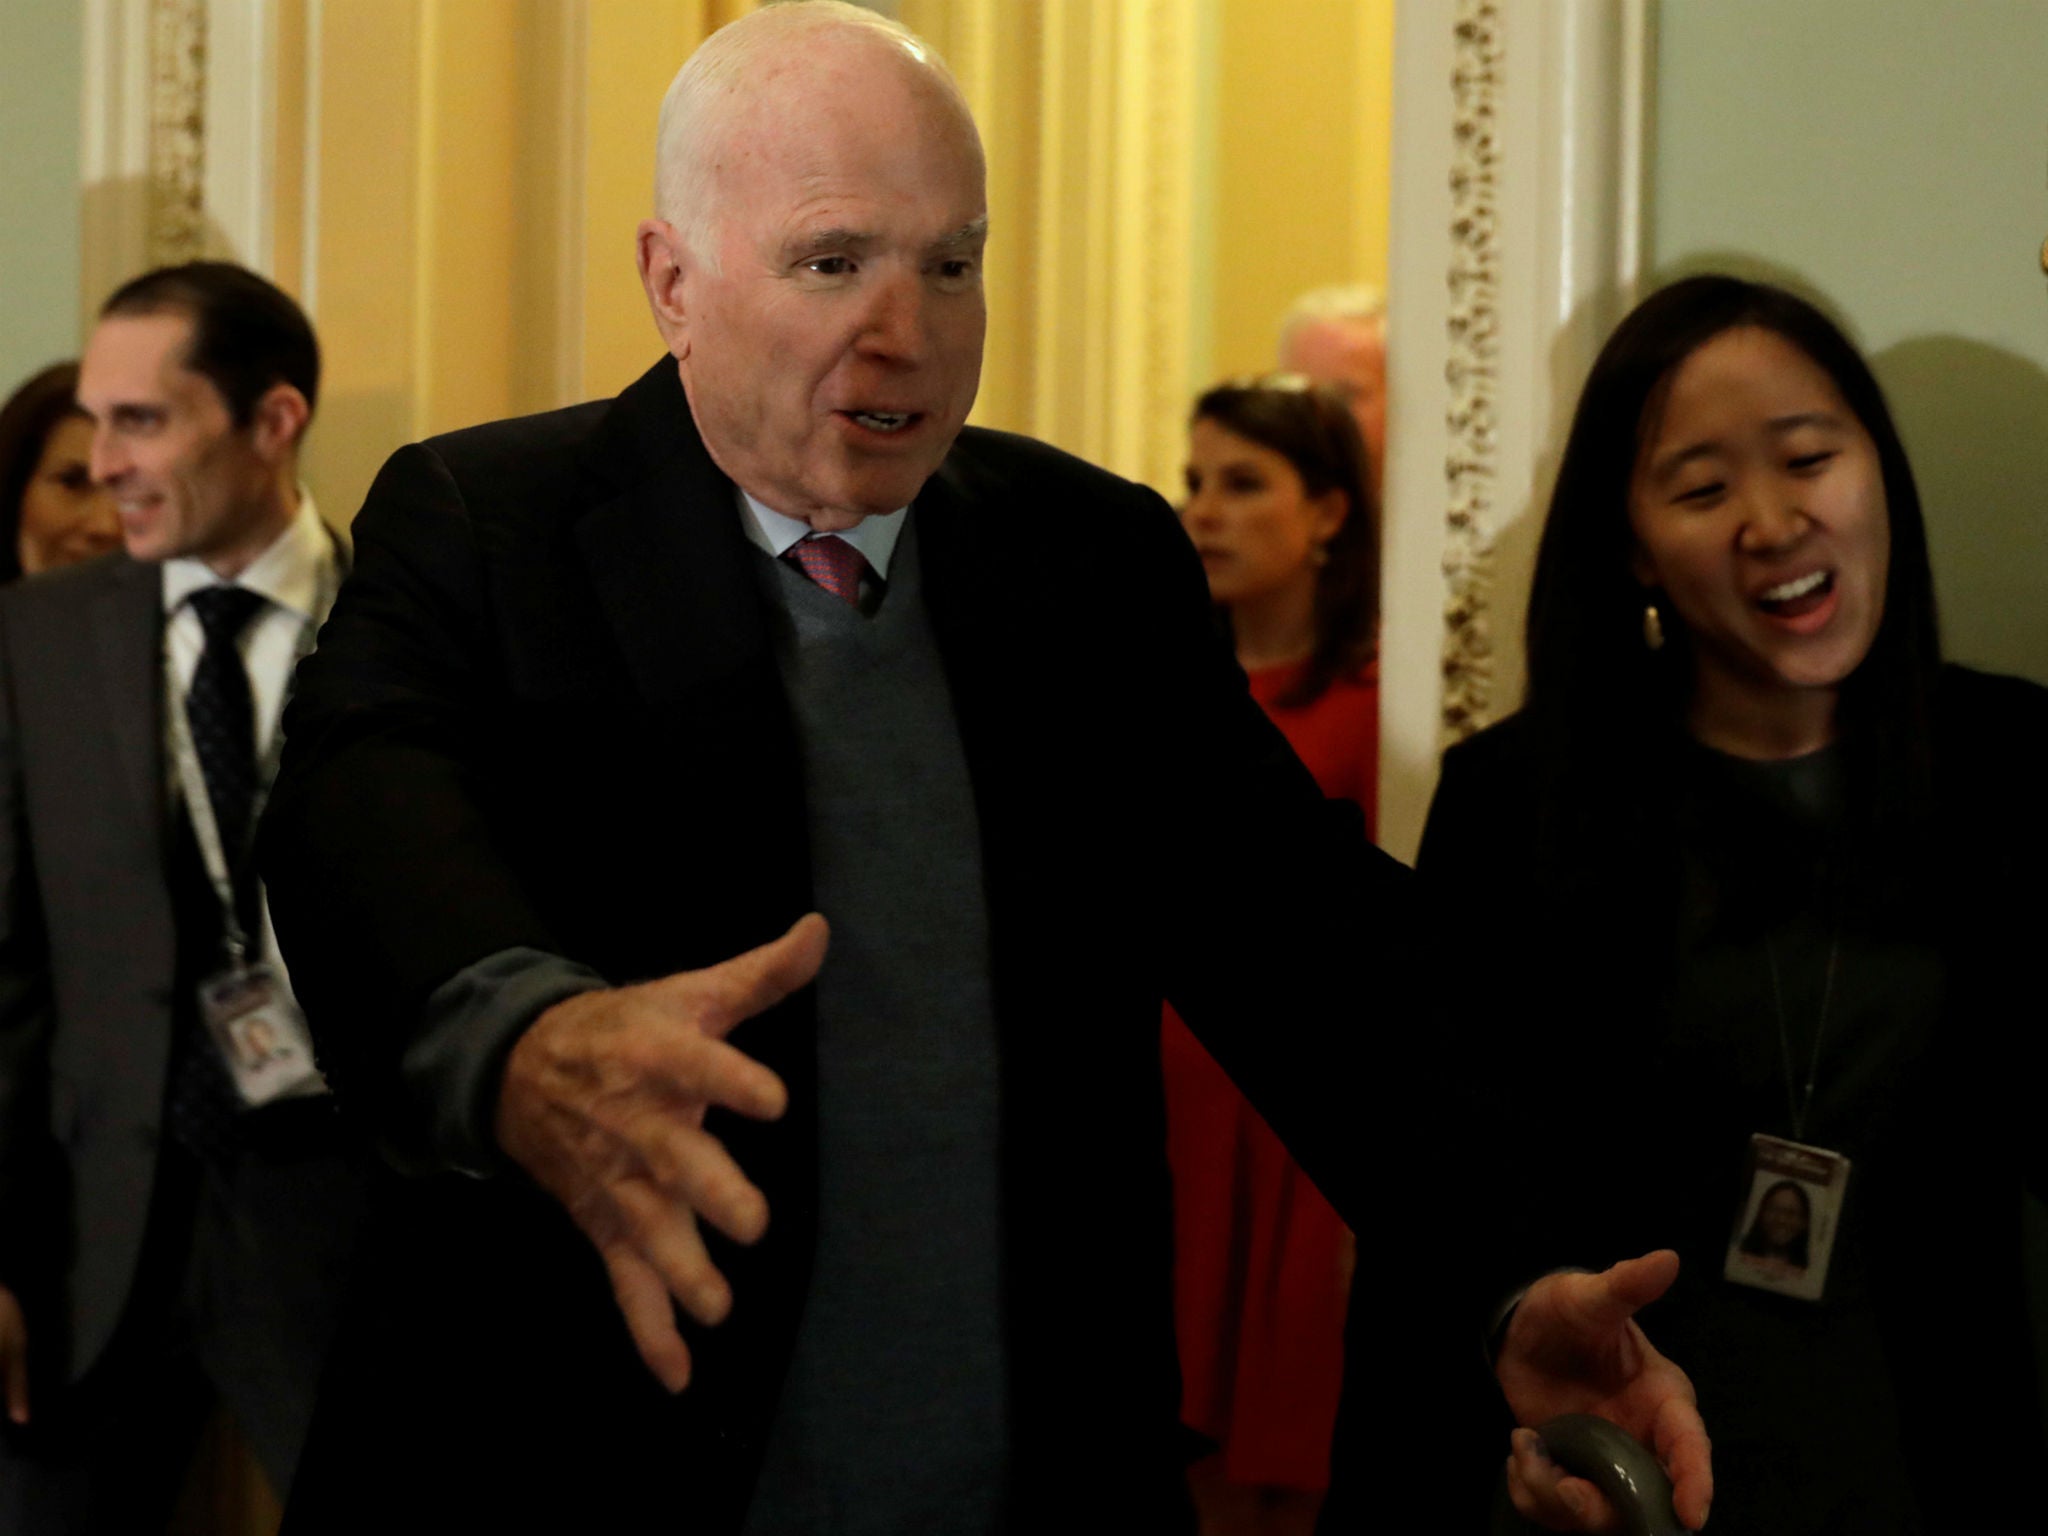 John McCain said Russia has been sowing chaos with 'assassinations, cyber-attacks, and malign influence'